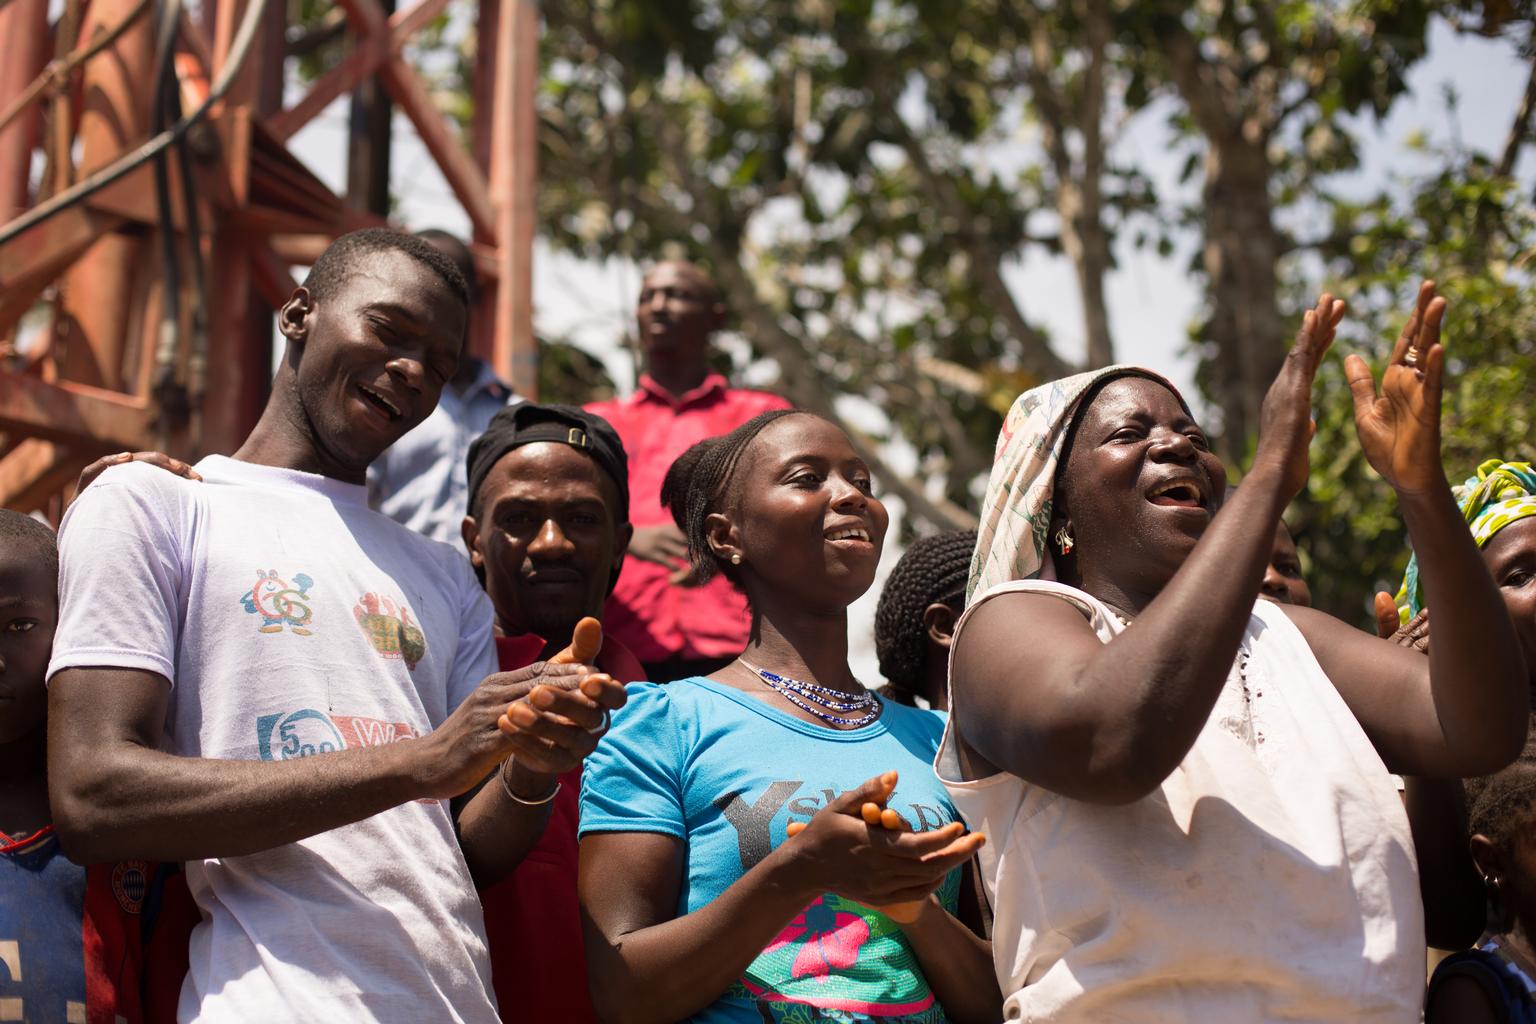 On 13 May 2015 in Guinea, onlookers applaud and celebrate after a borehole drilling rig